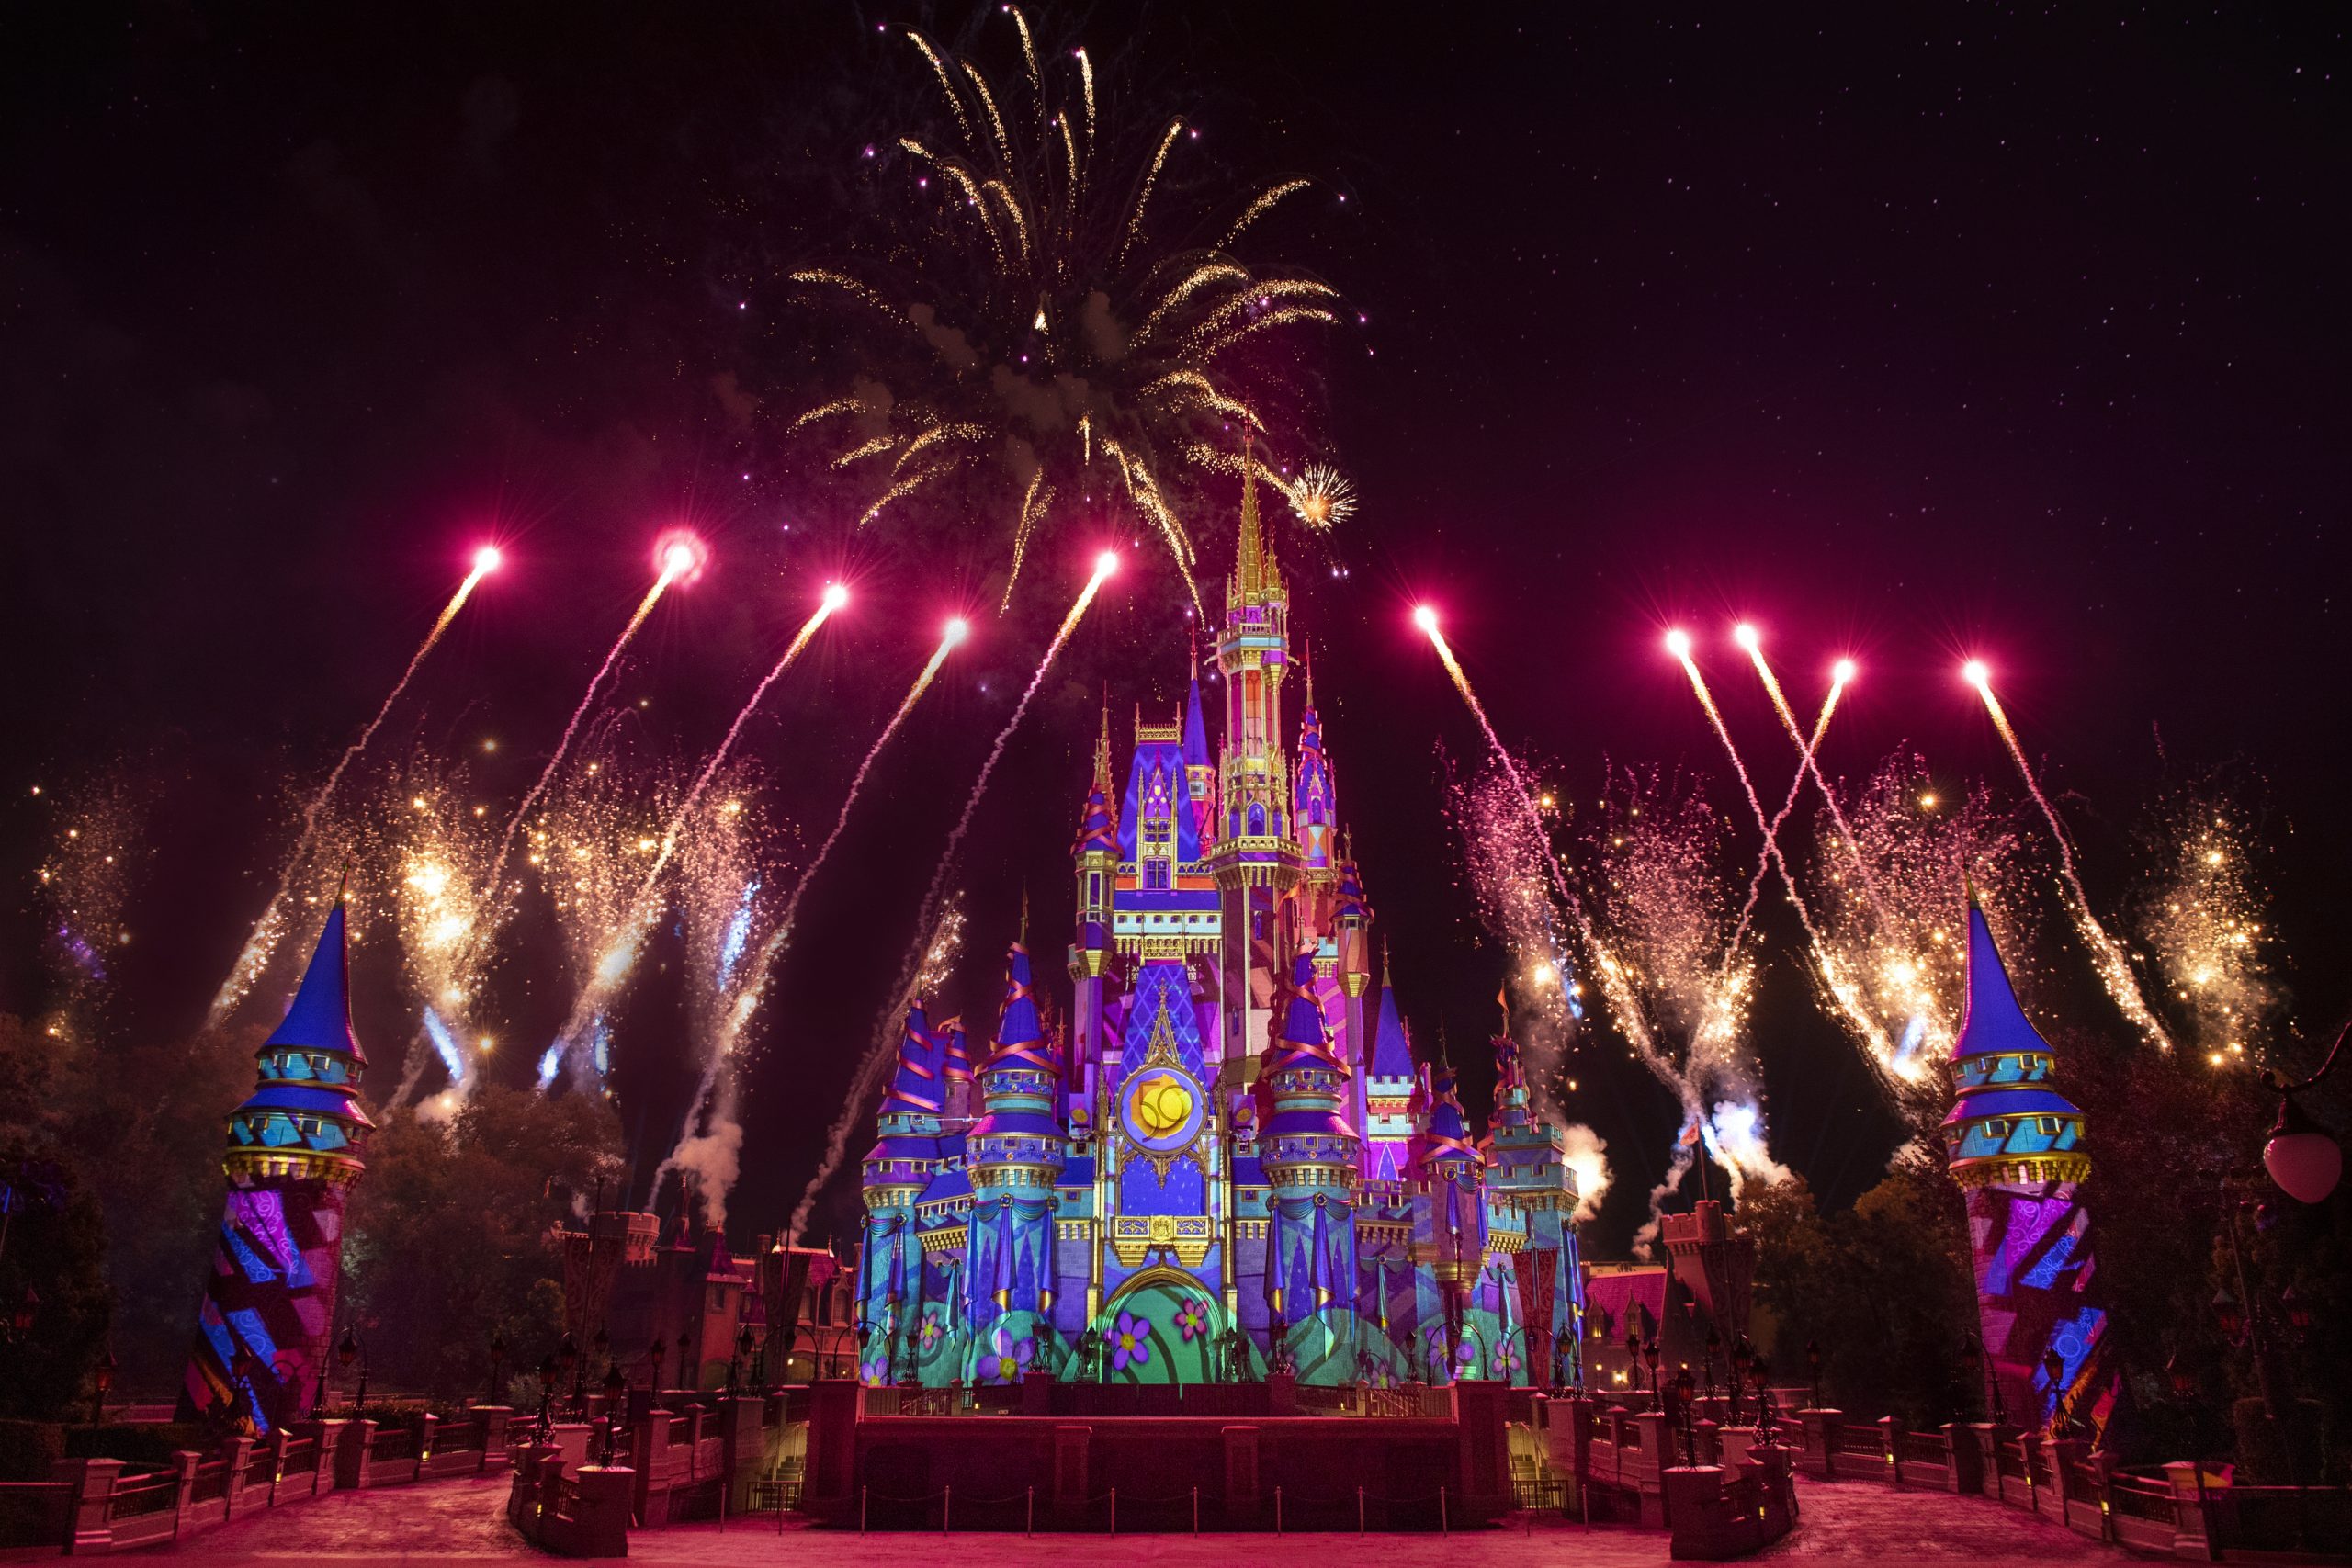 Cinderella's Castle at Magic Kingdom lit up while colorful fireworks surround